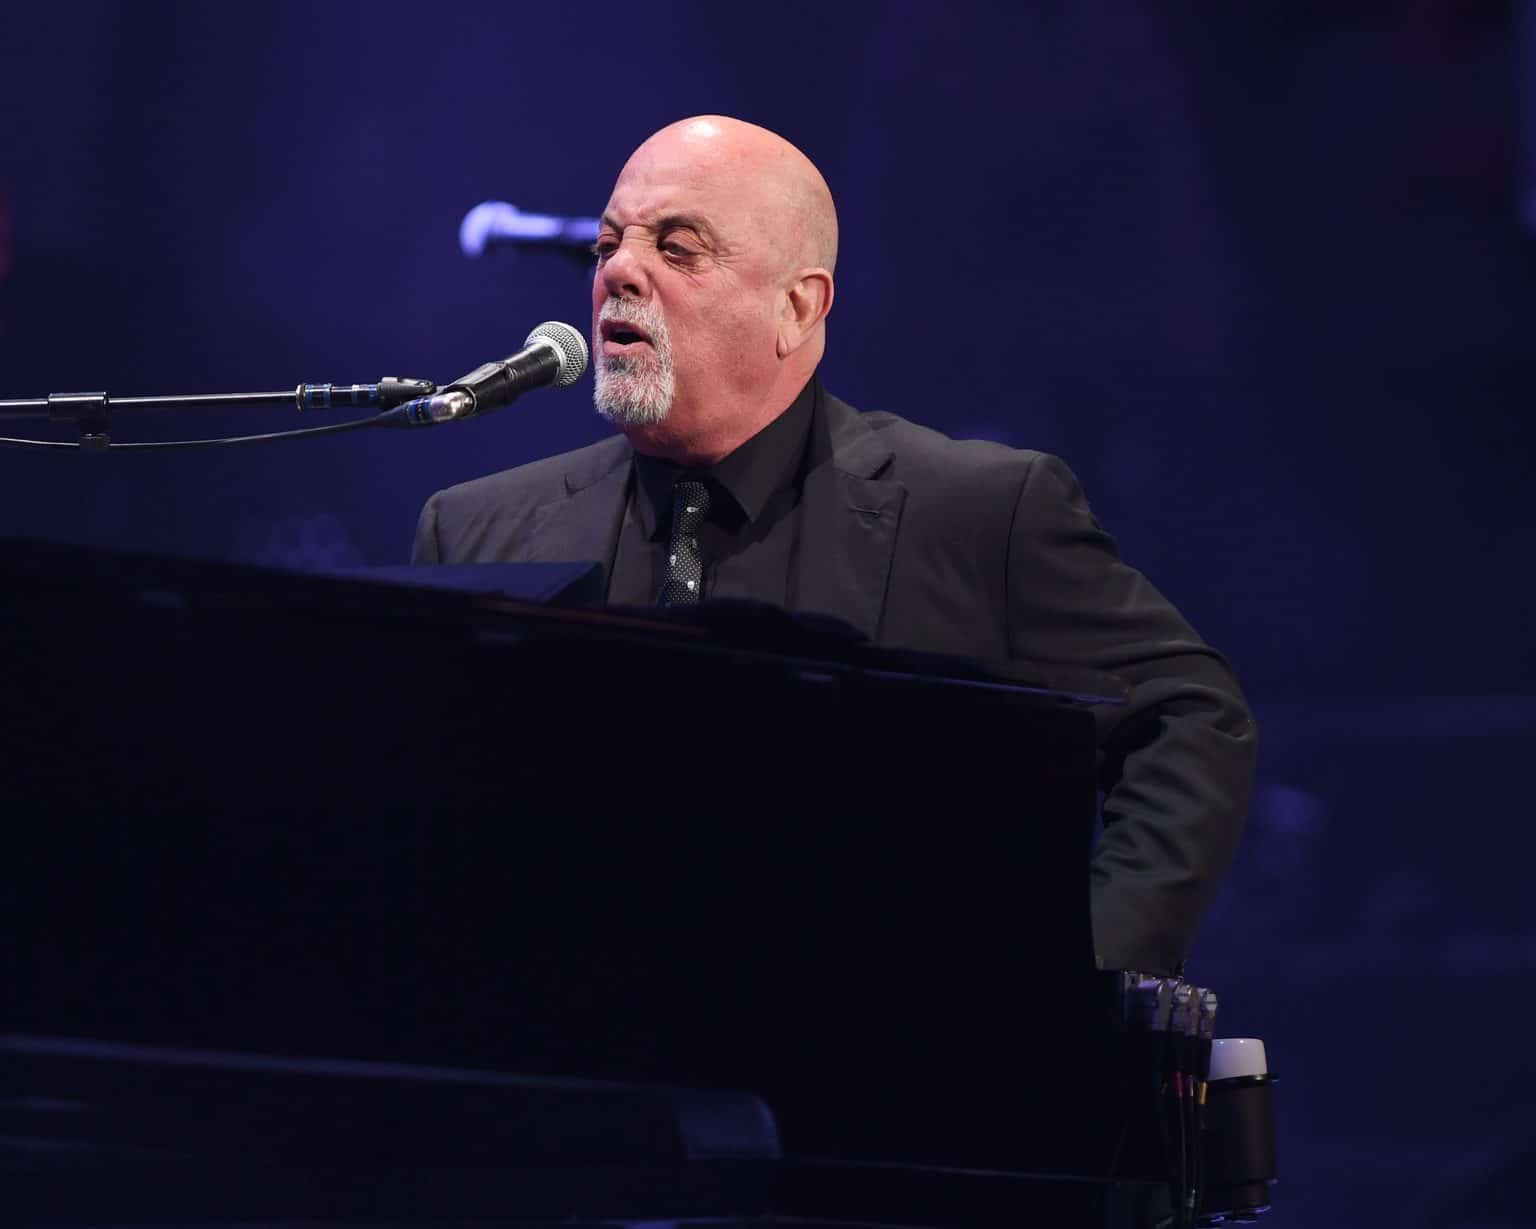 Billy Joel Shows Off New 50-Lb. Weight Loss At Concert